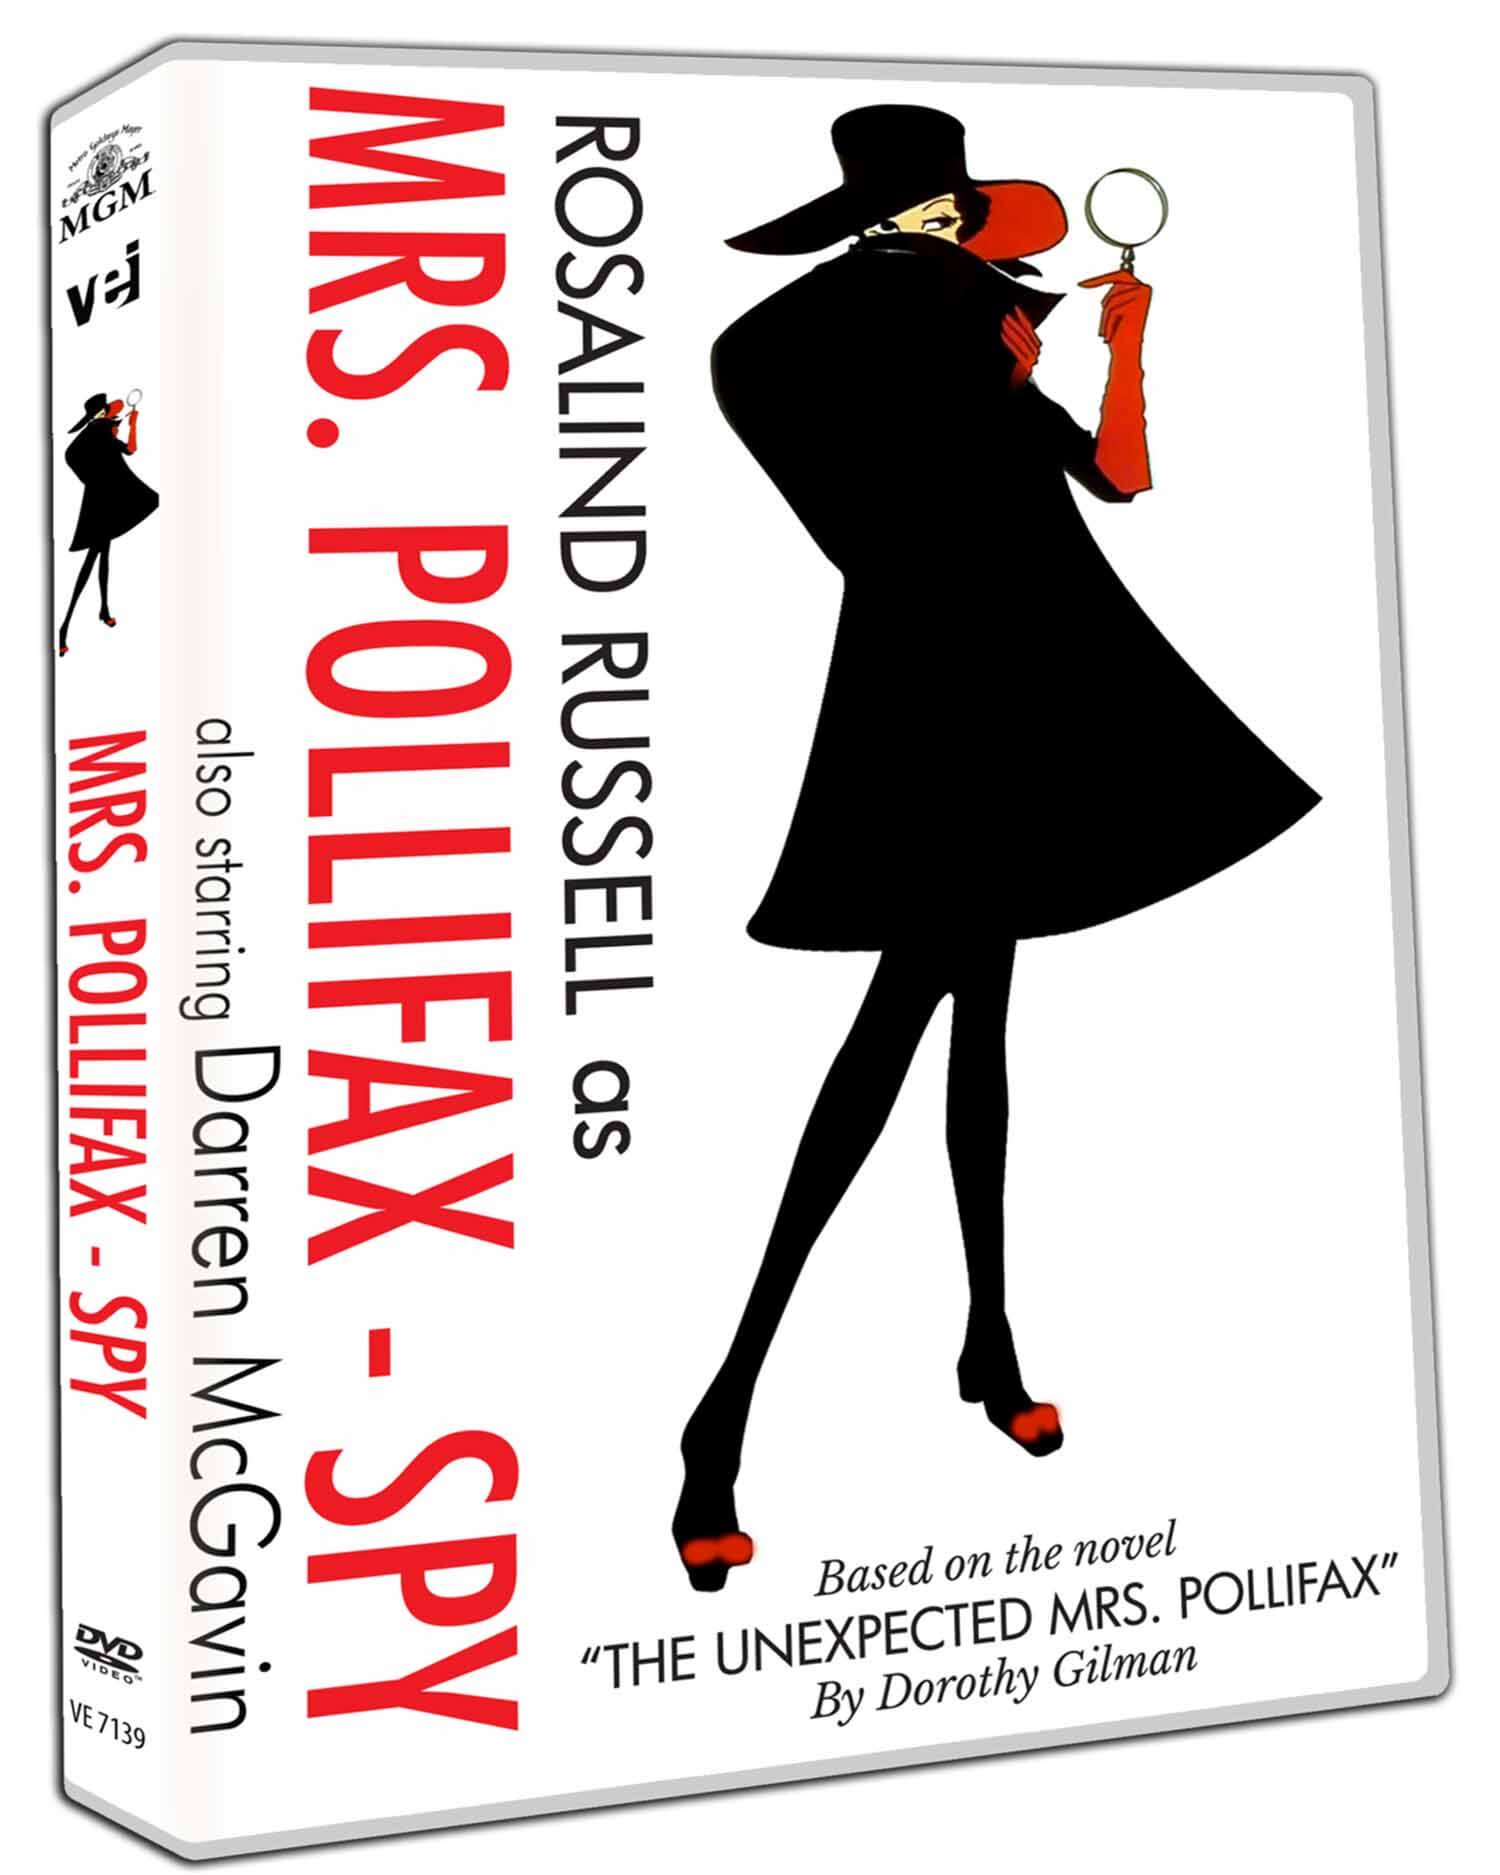 Rosalind Russell as "MRS. POLLIFAX-SPY"-Based on Dorothy Gilman